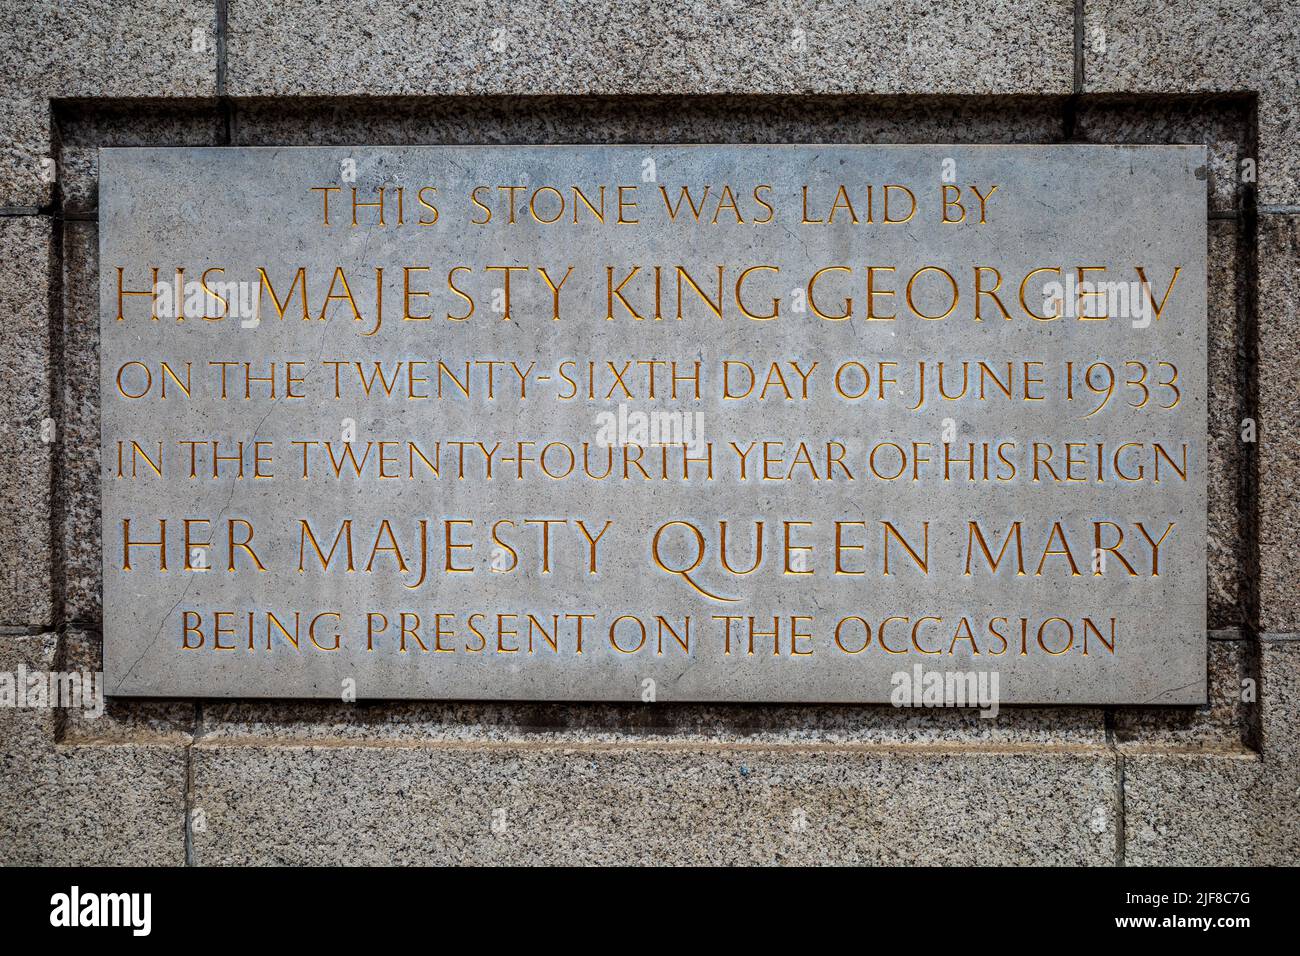 Senate House Foundation Stone University of London - The ceremonial foundation stone was laid by King George V on 26 June 1933. Stock Photo